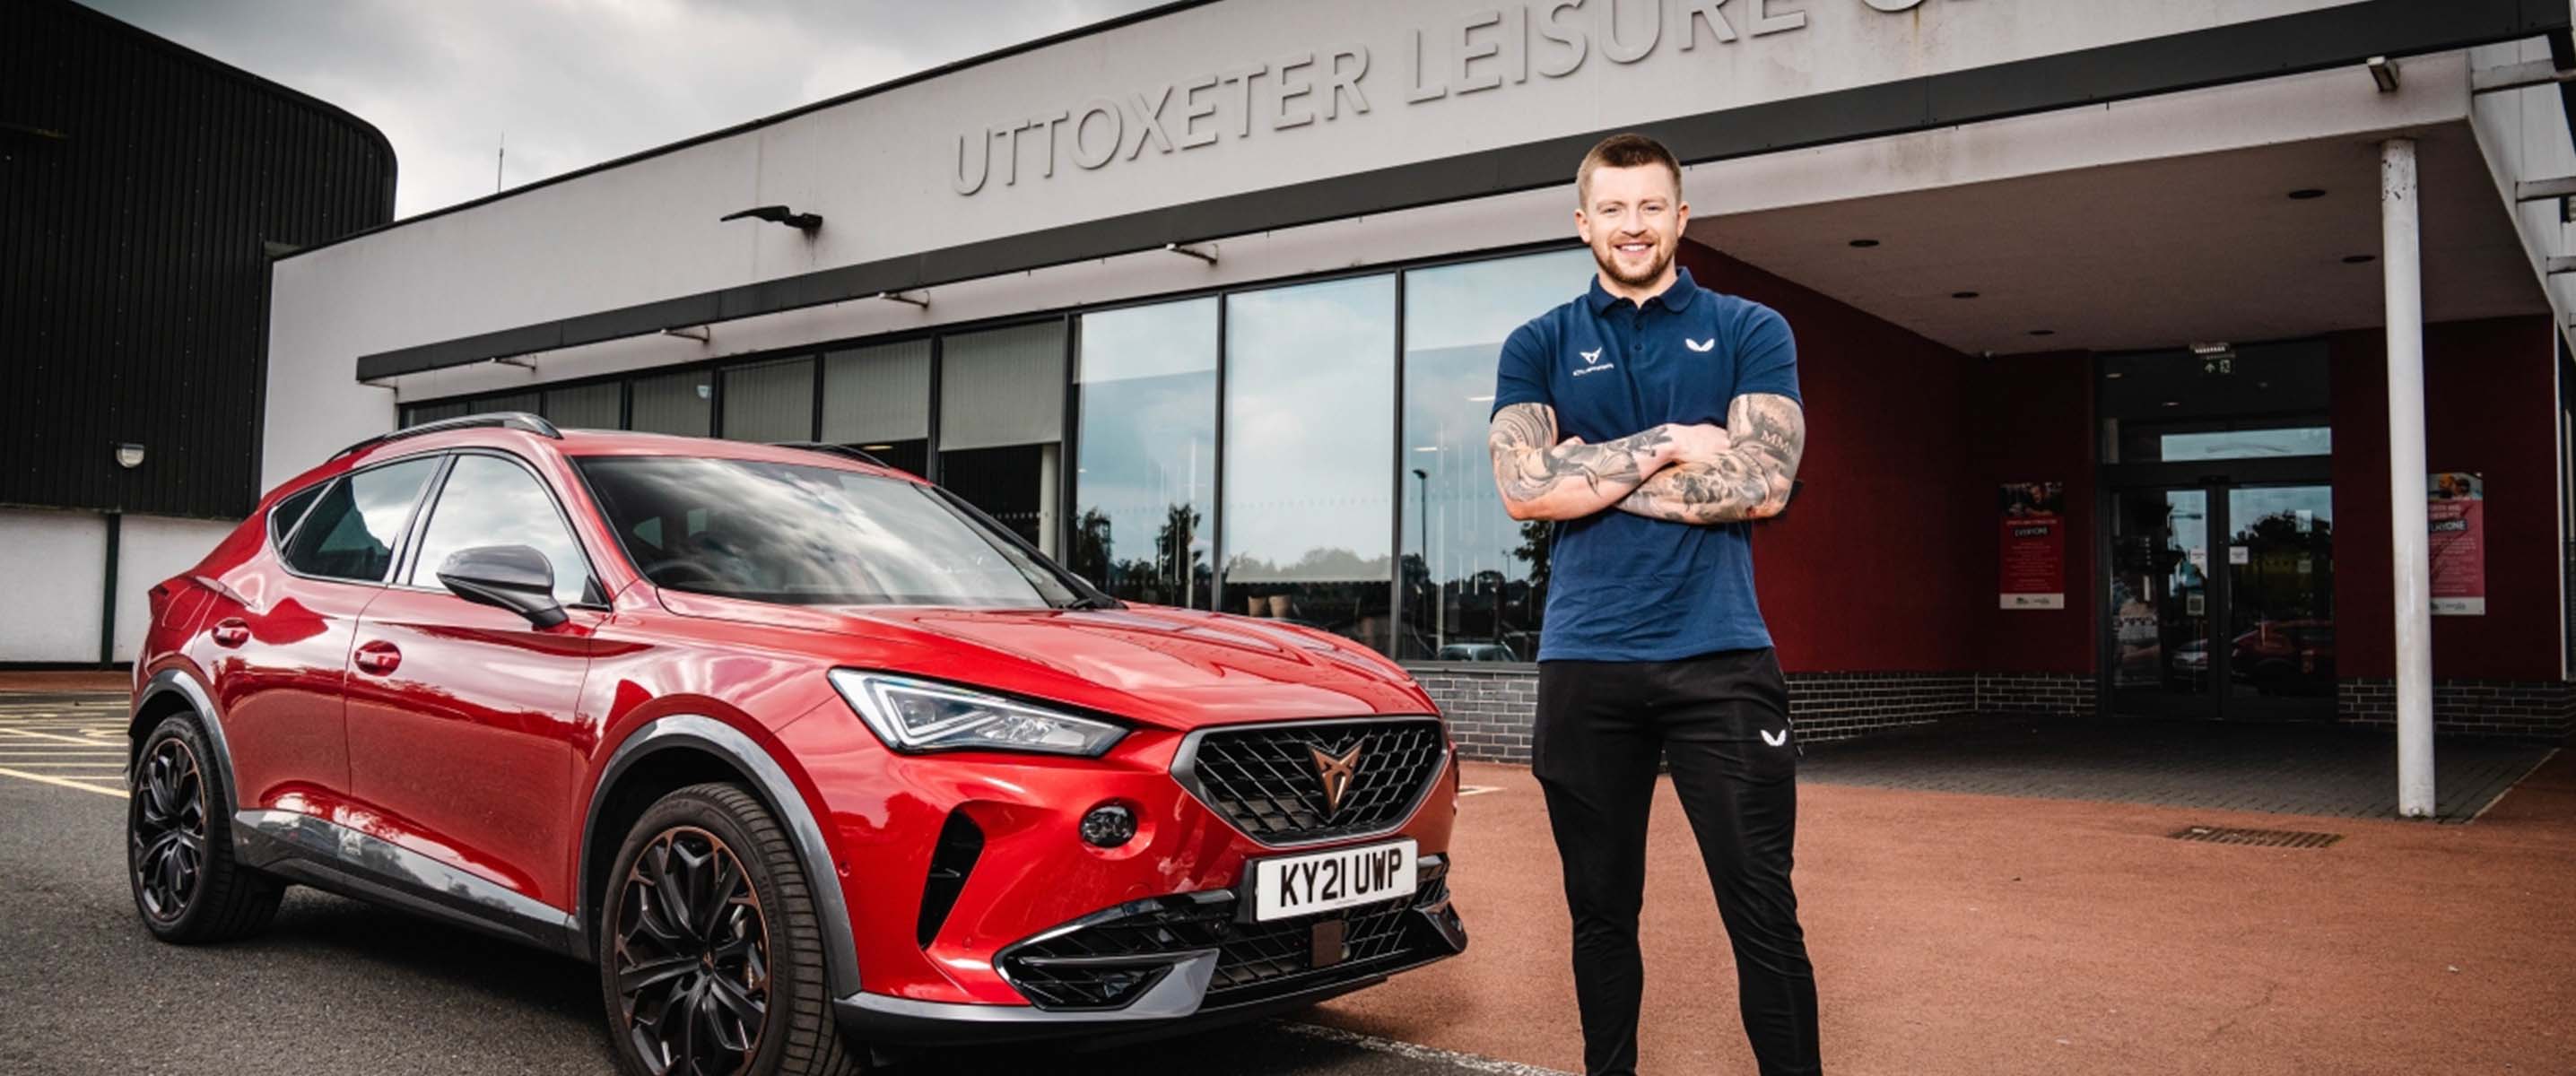 Adam Peaty standing next to a red CUPRA Formentor outside of Uttoxeter Leisure Centre